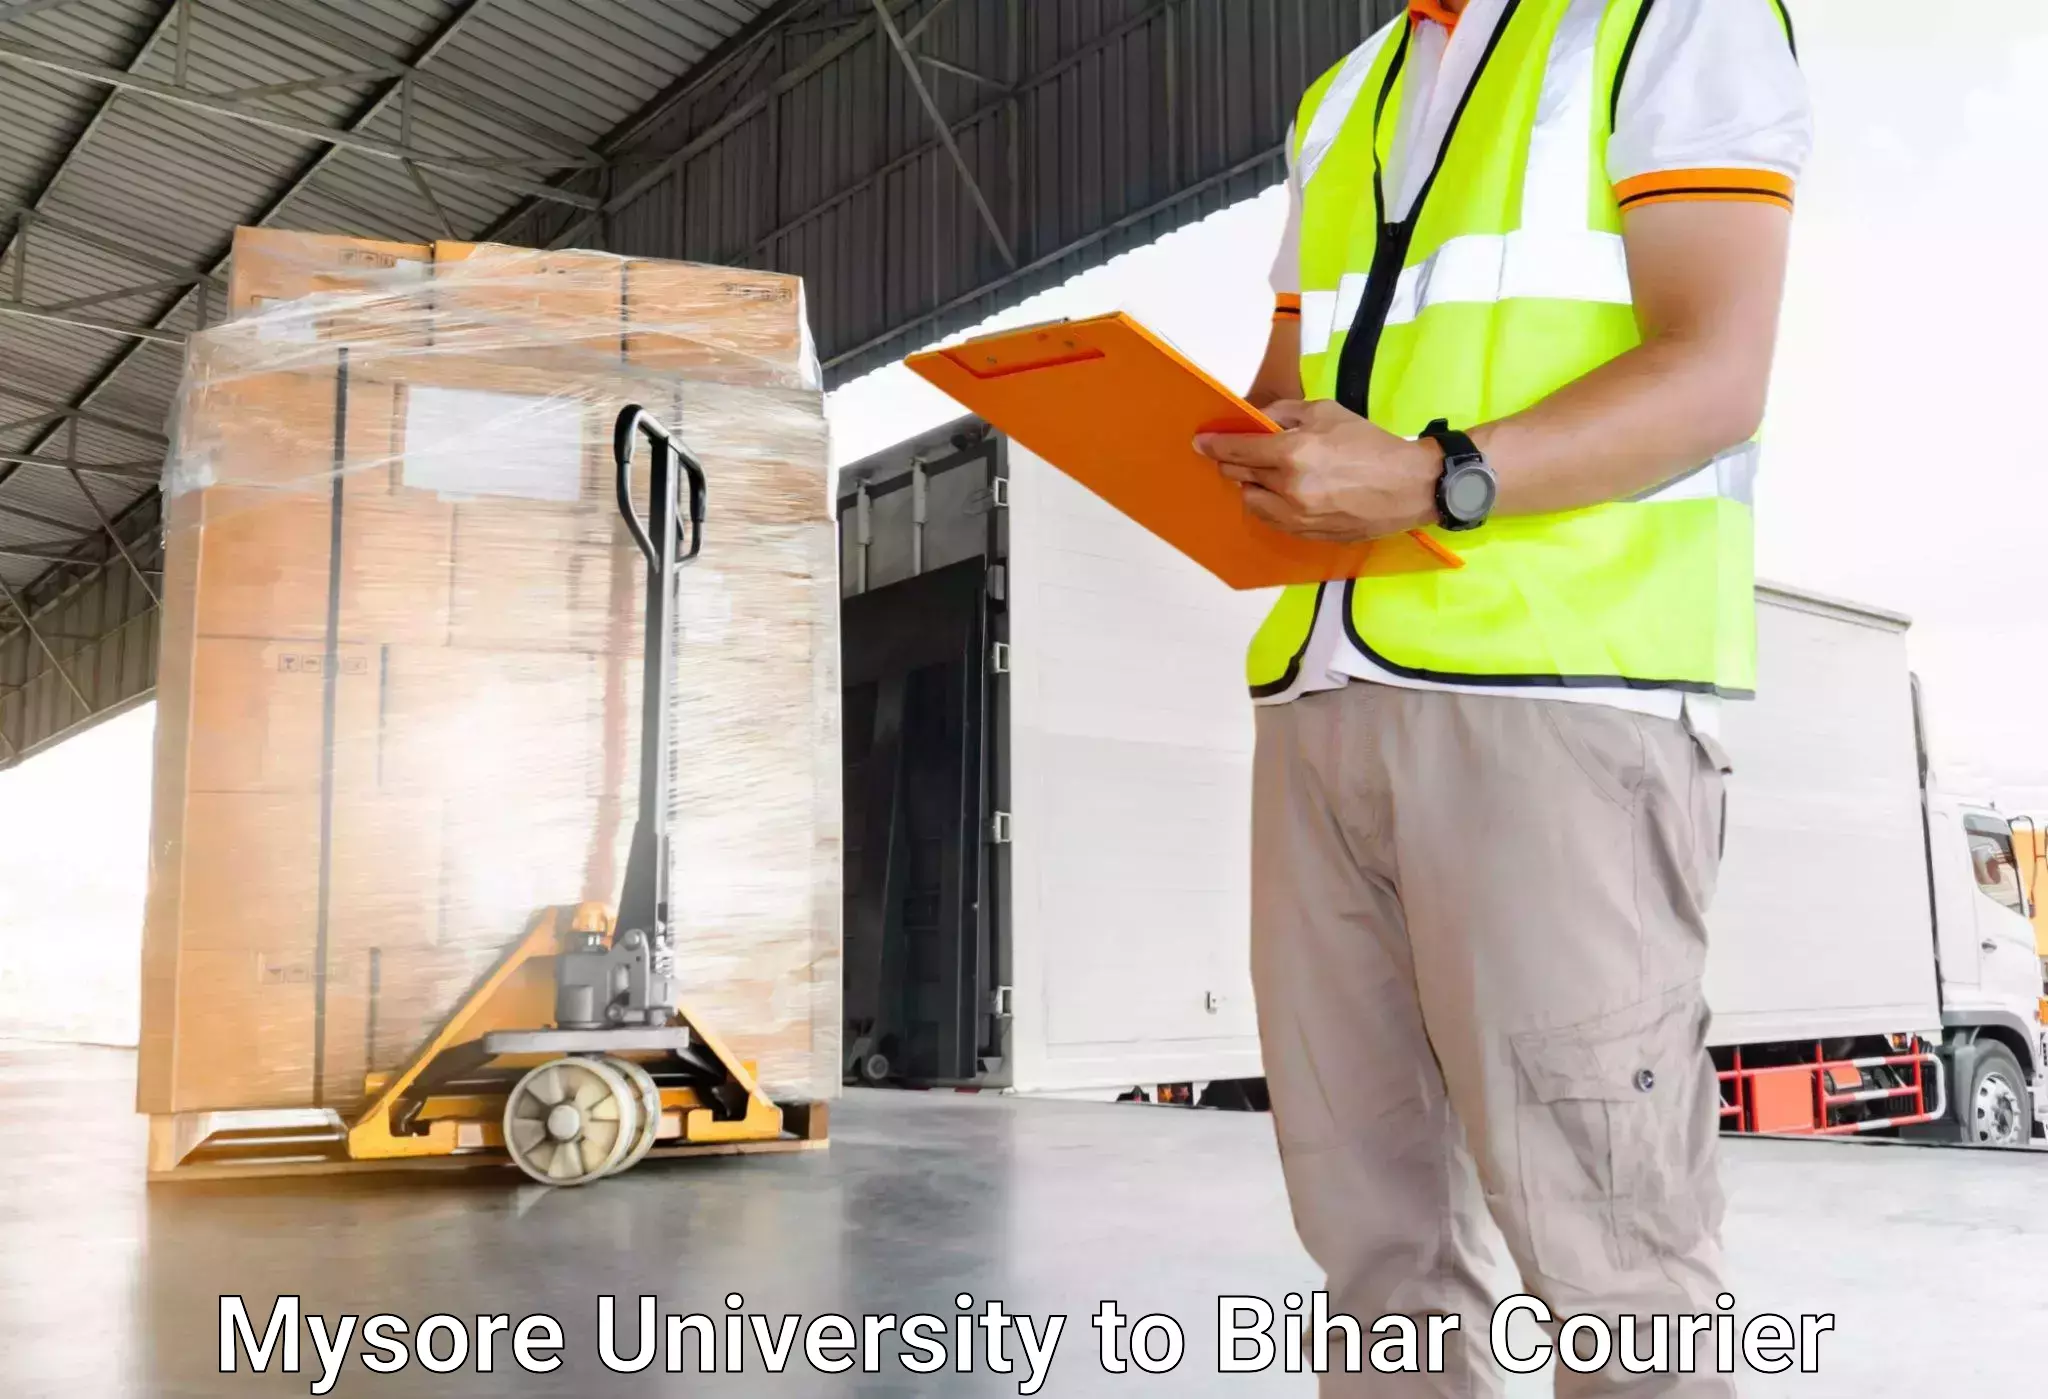 Baggage shipping schedule Mysore University to Makhdumpur